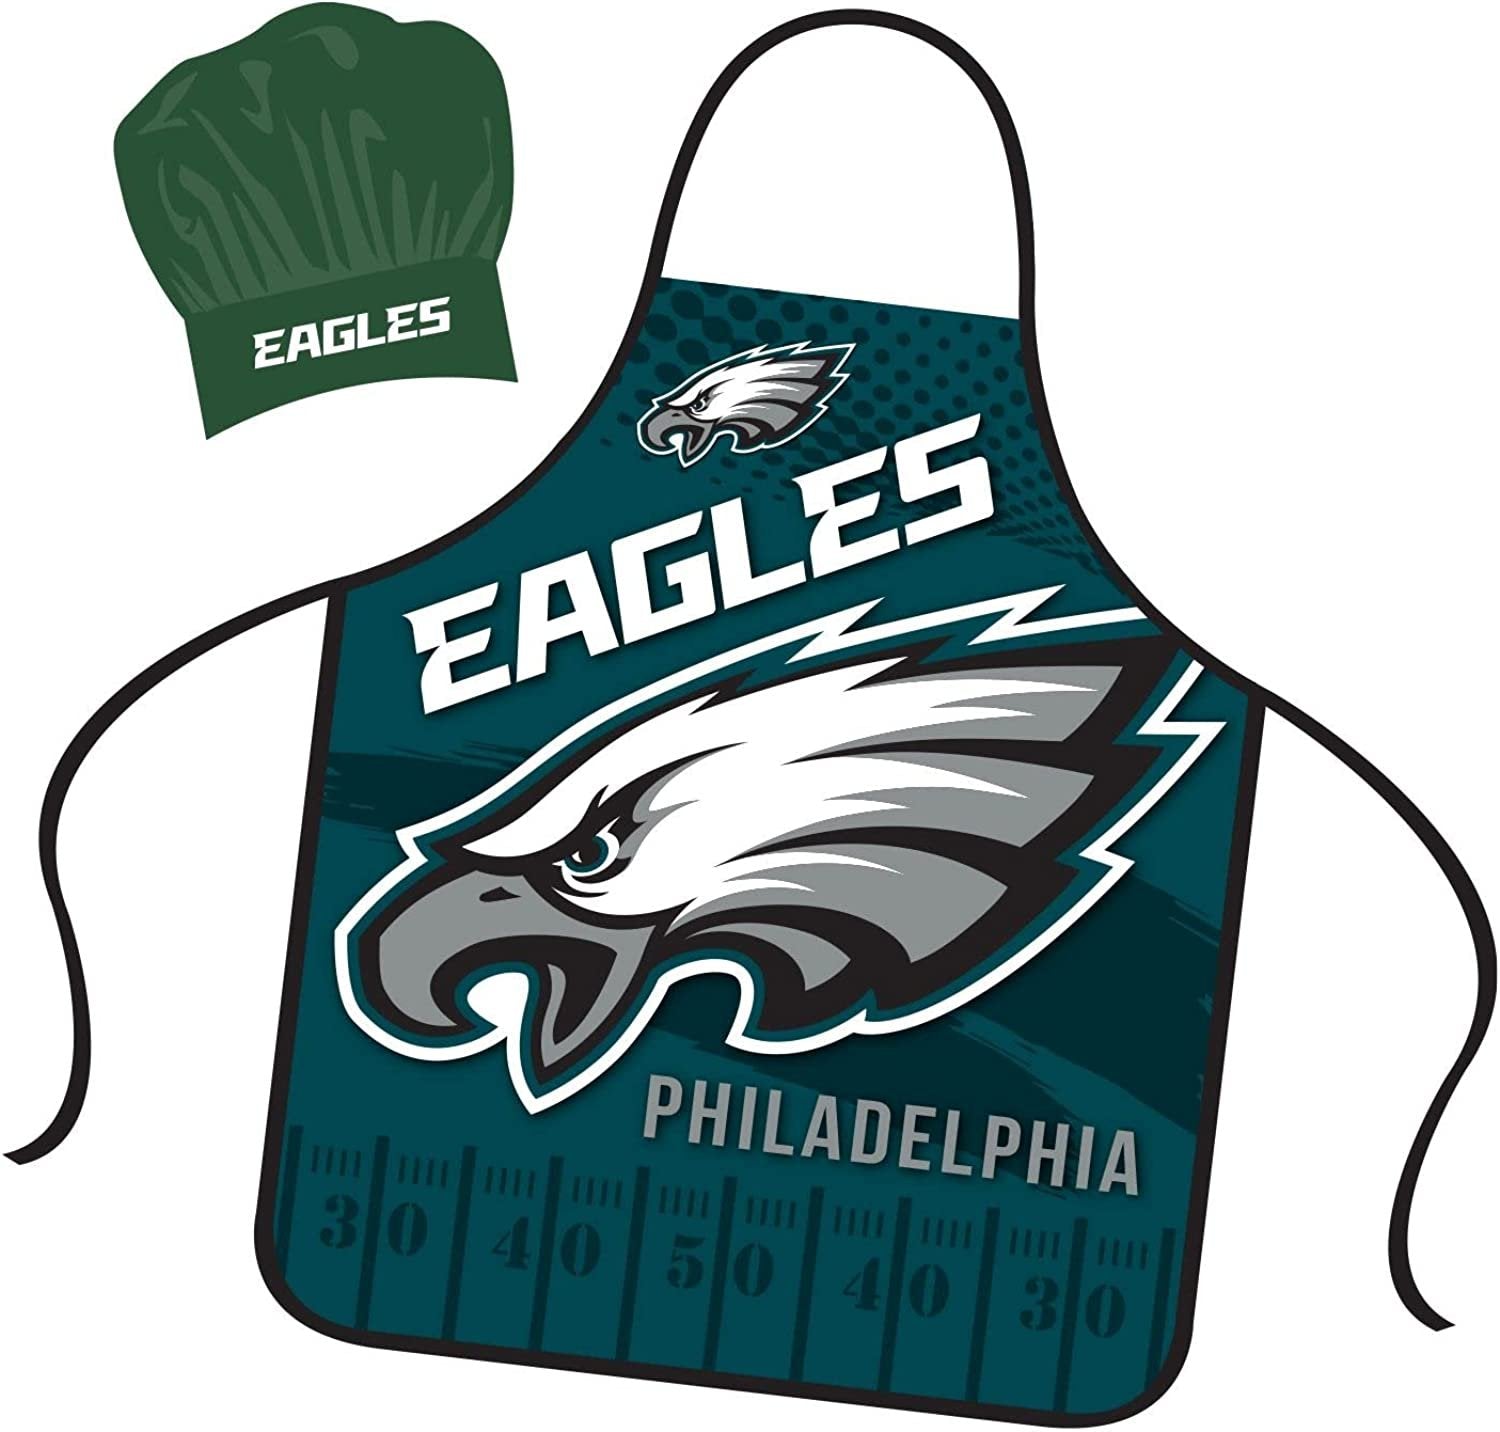 Philadelphia Eagles Apron Chef Hat Set Full Color Universal Size Tie Back Grilling Tailgate BBQ Cooking Host